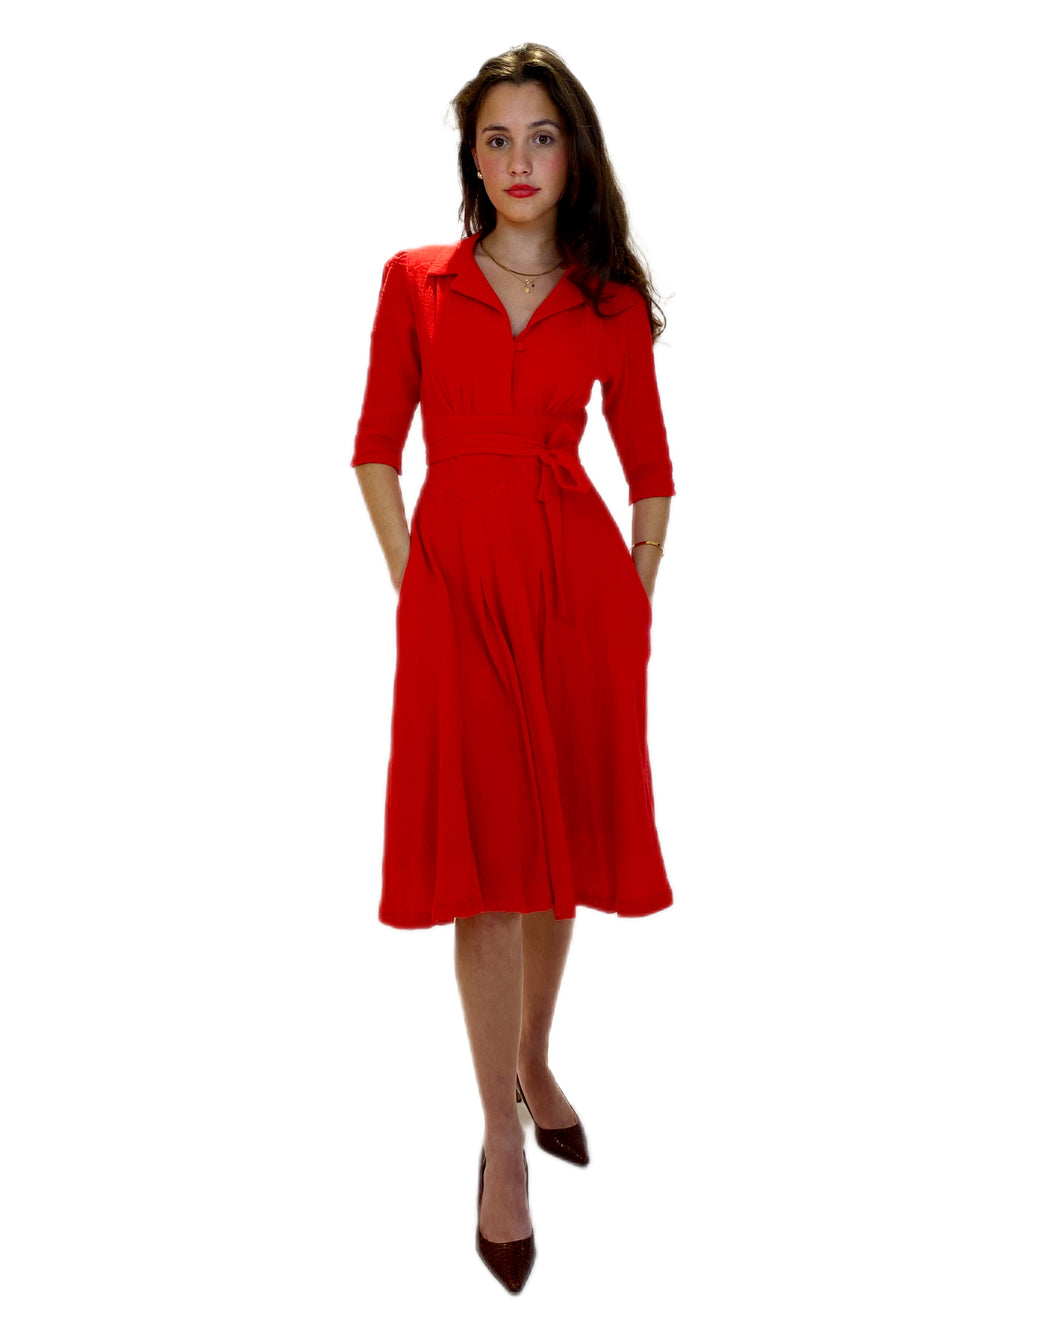 The Dorothy in red cheesecloth